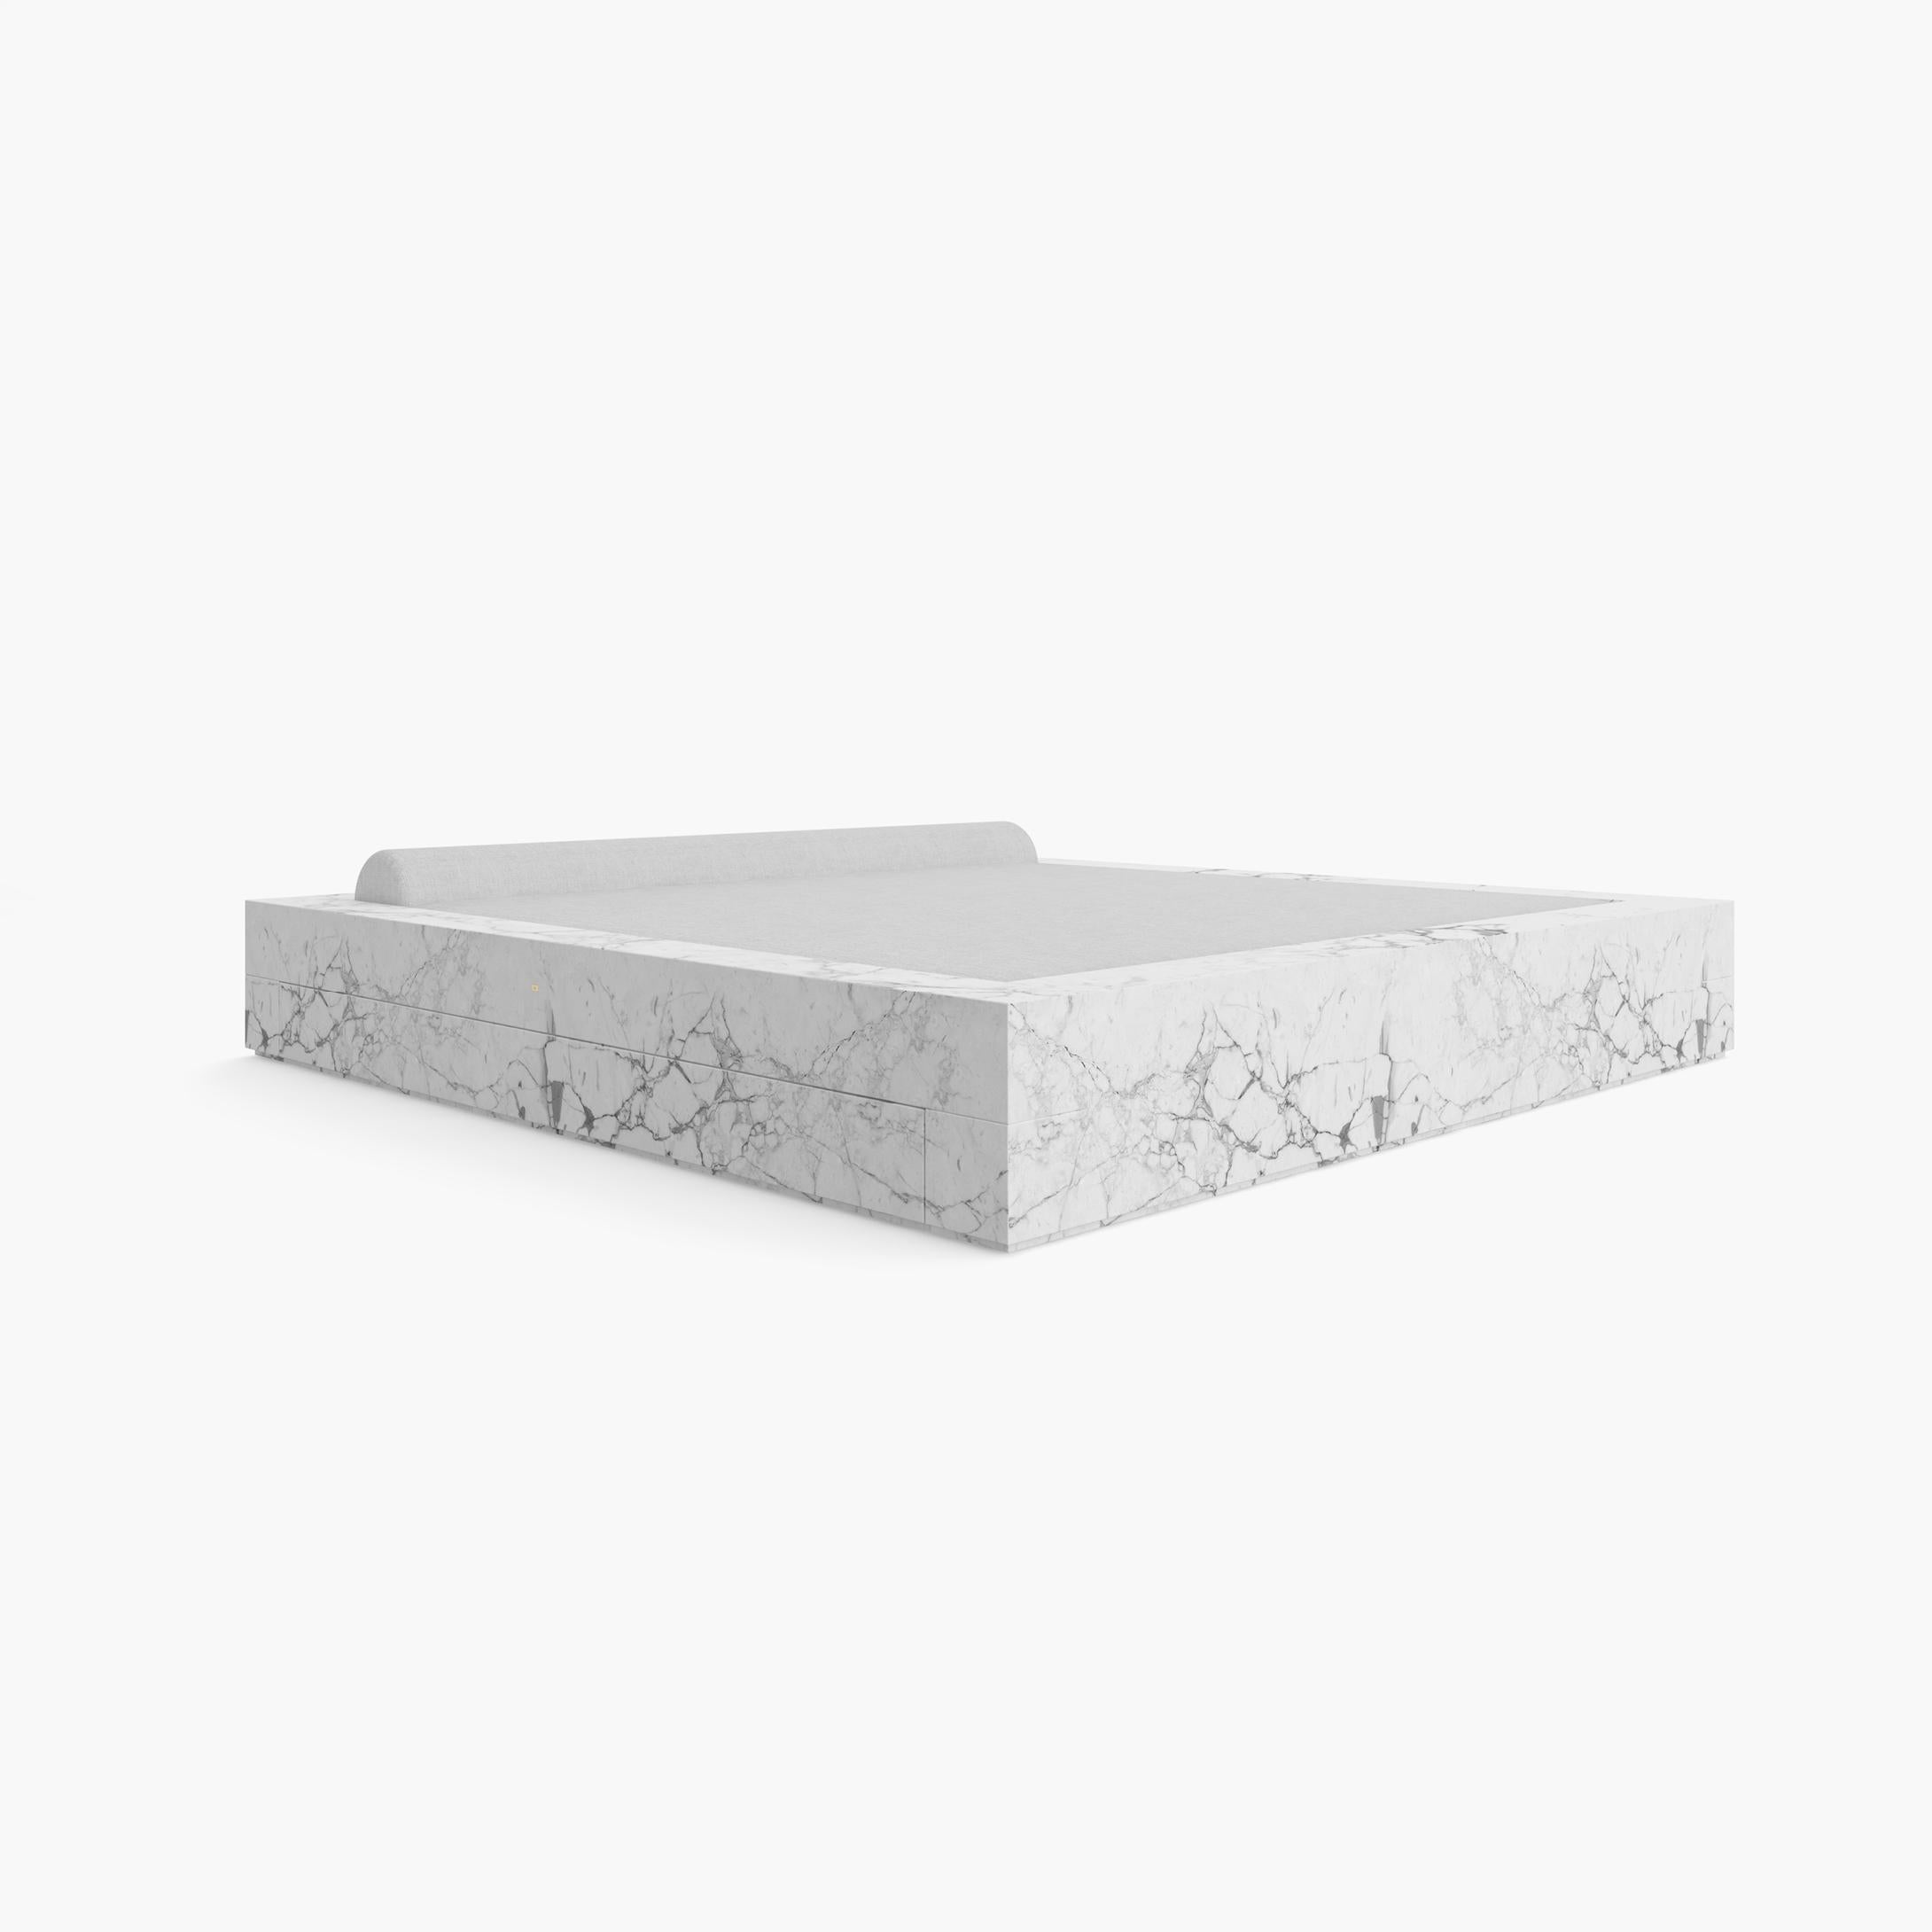 European Bed White Marble 260x260x40-220x220cm mattress, drawer Germany handcrafted pc1/1 For Sale